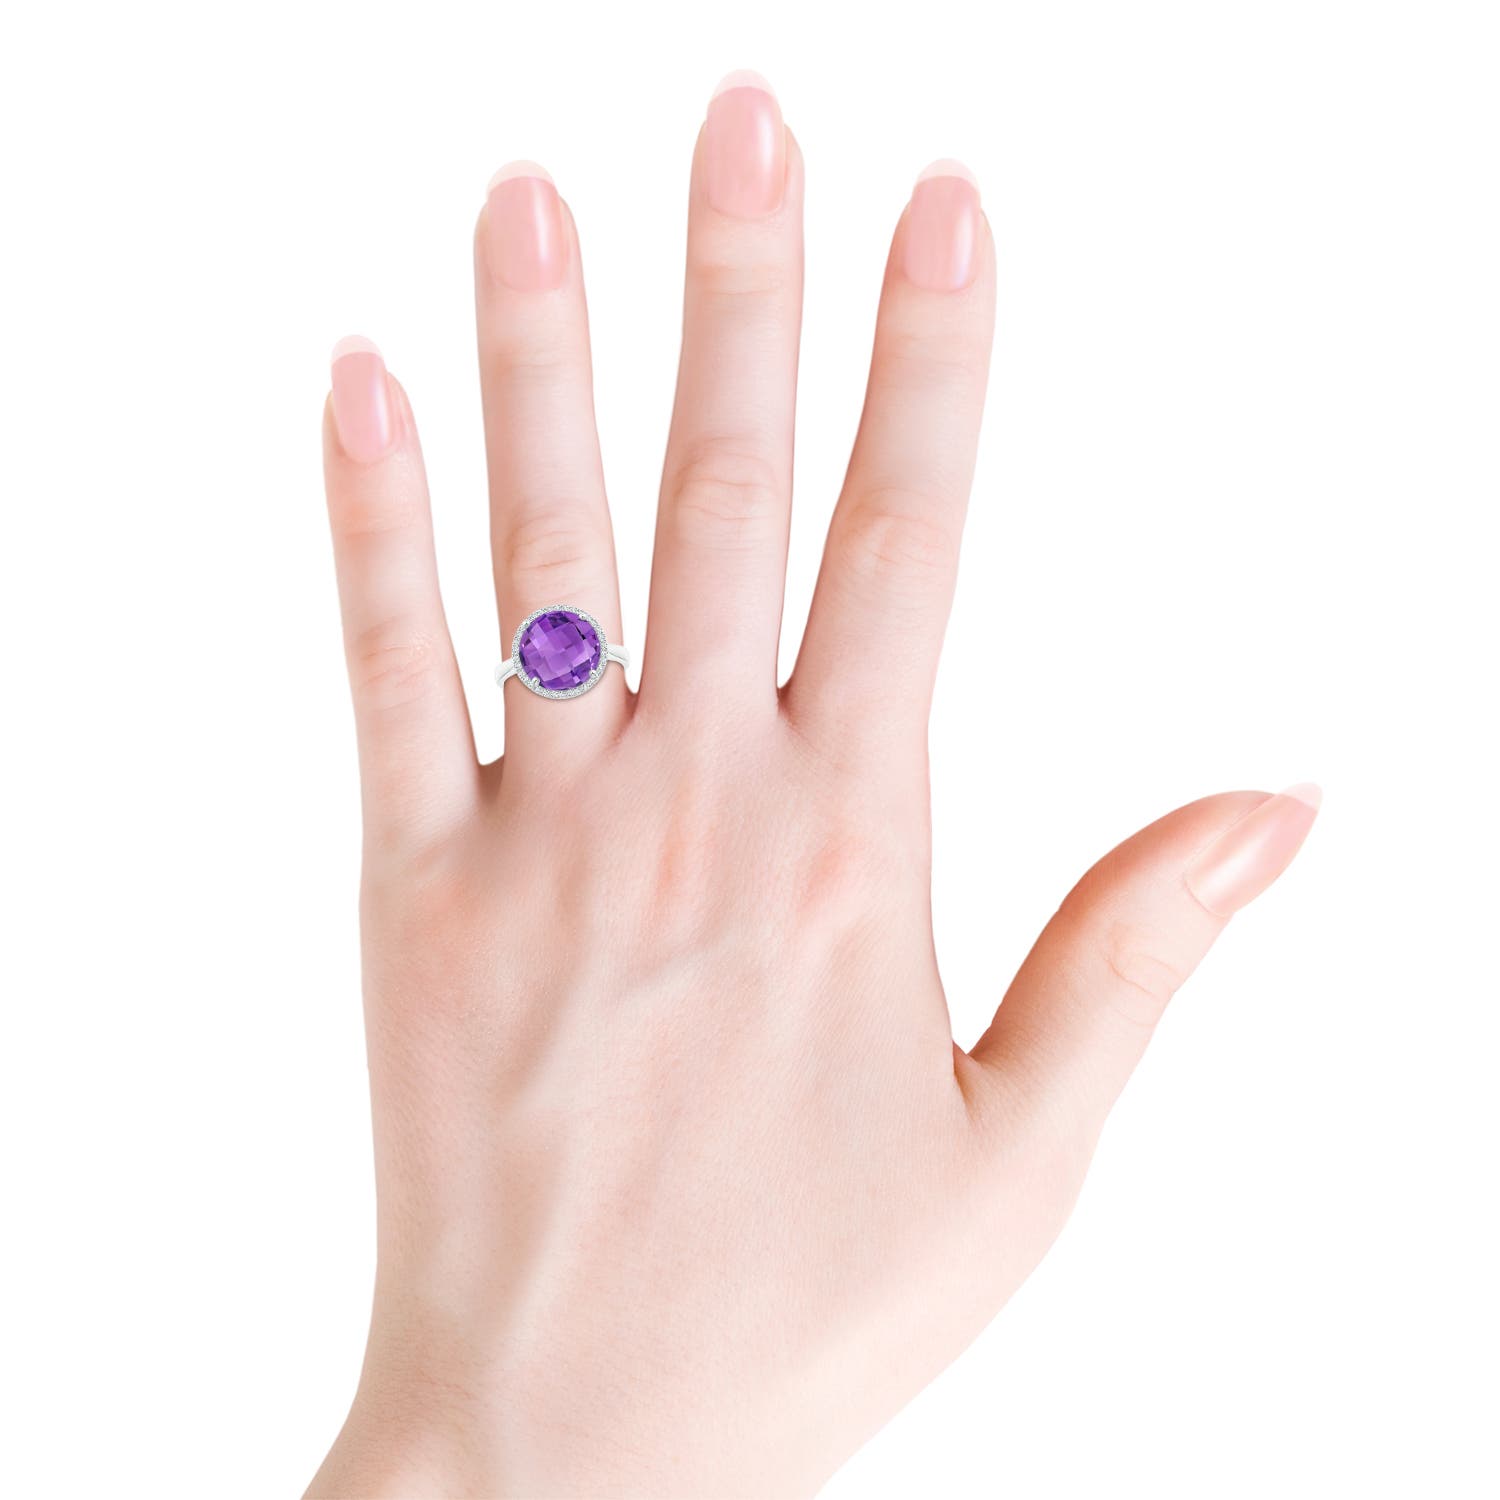 AA - Amethyst / 5.02 CT / 14 KT White Gold